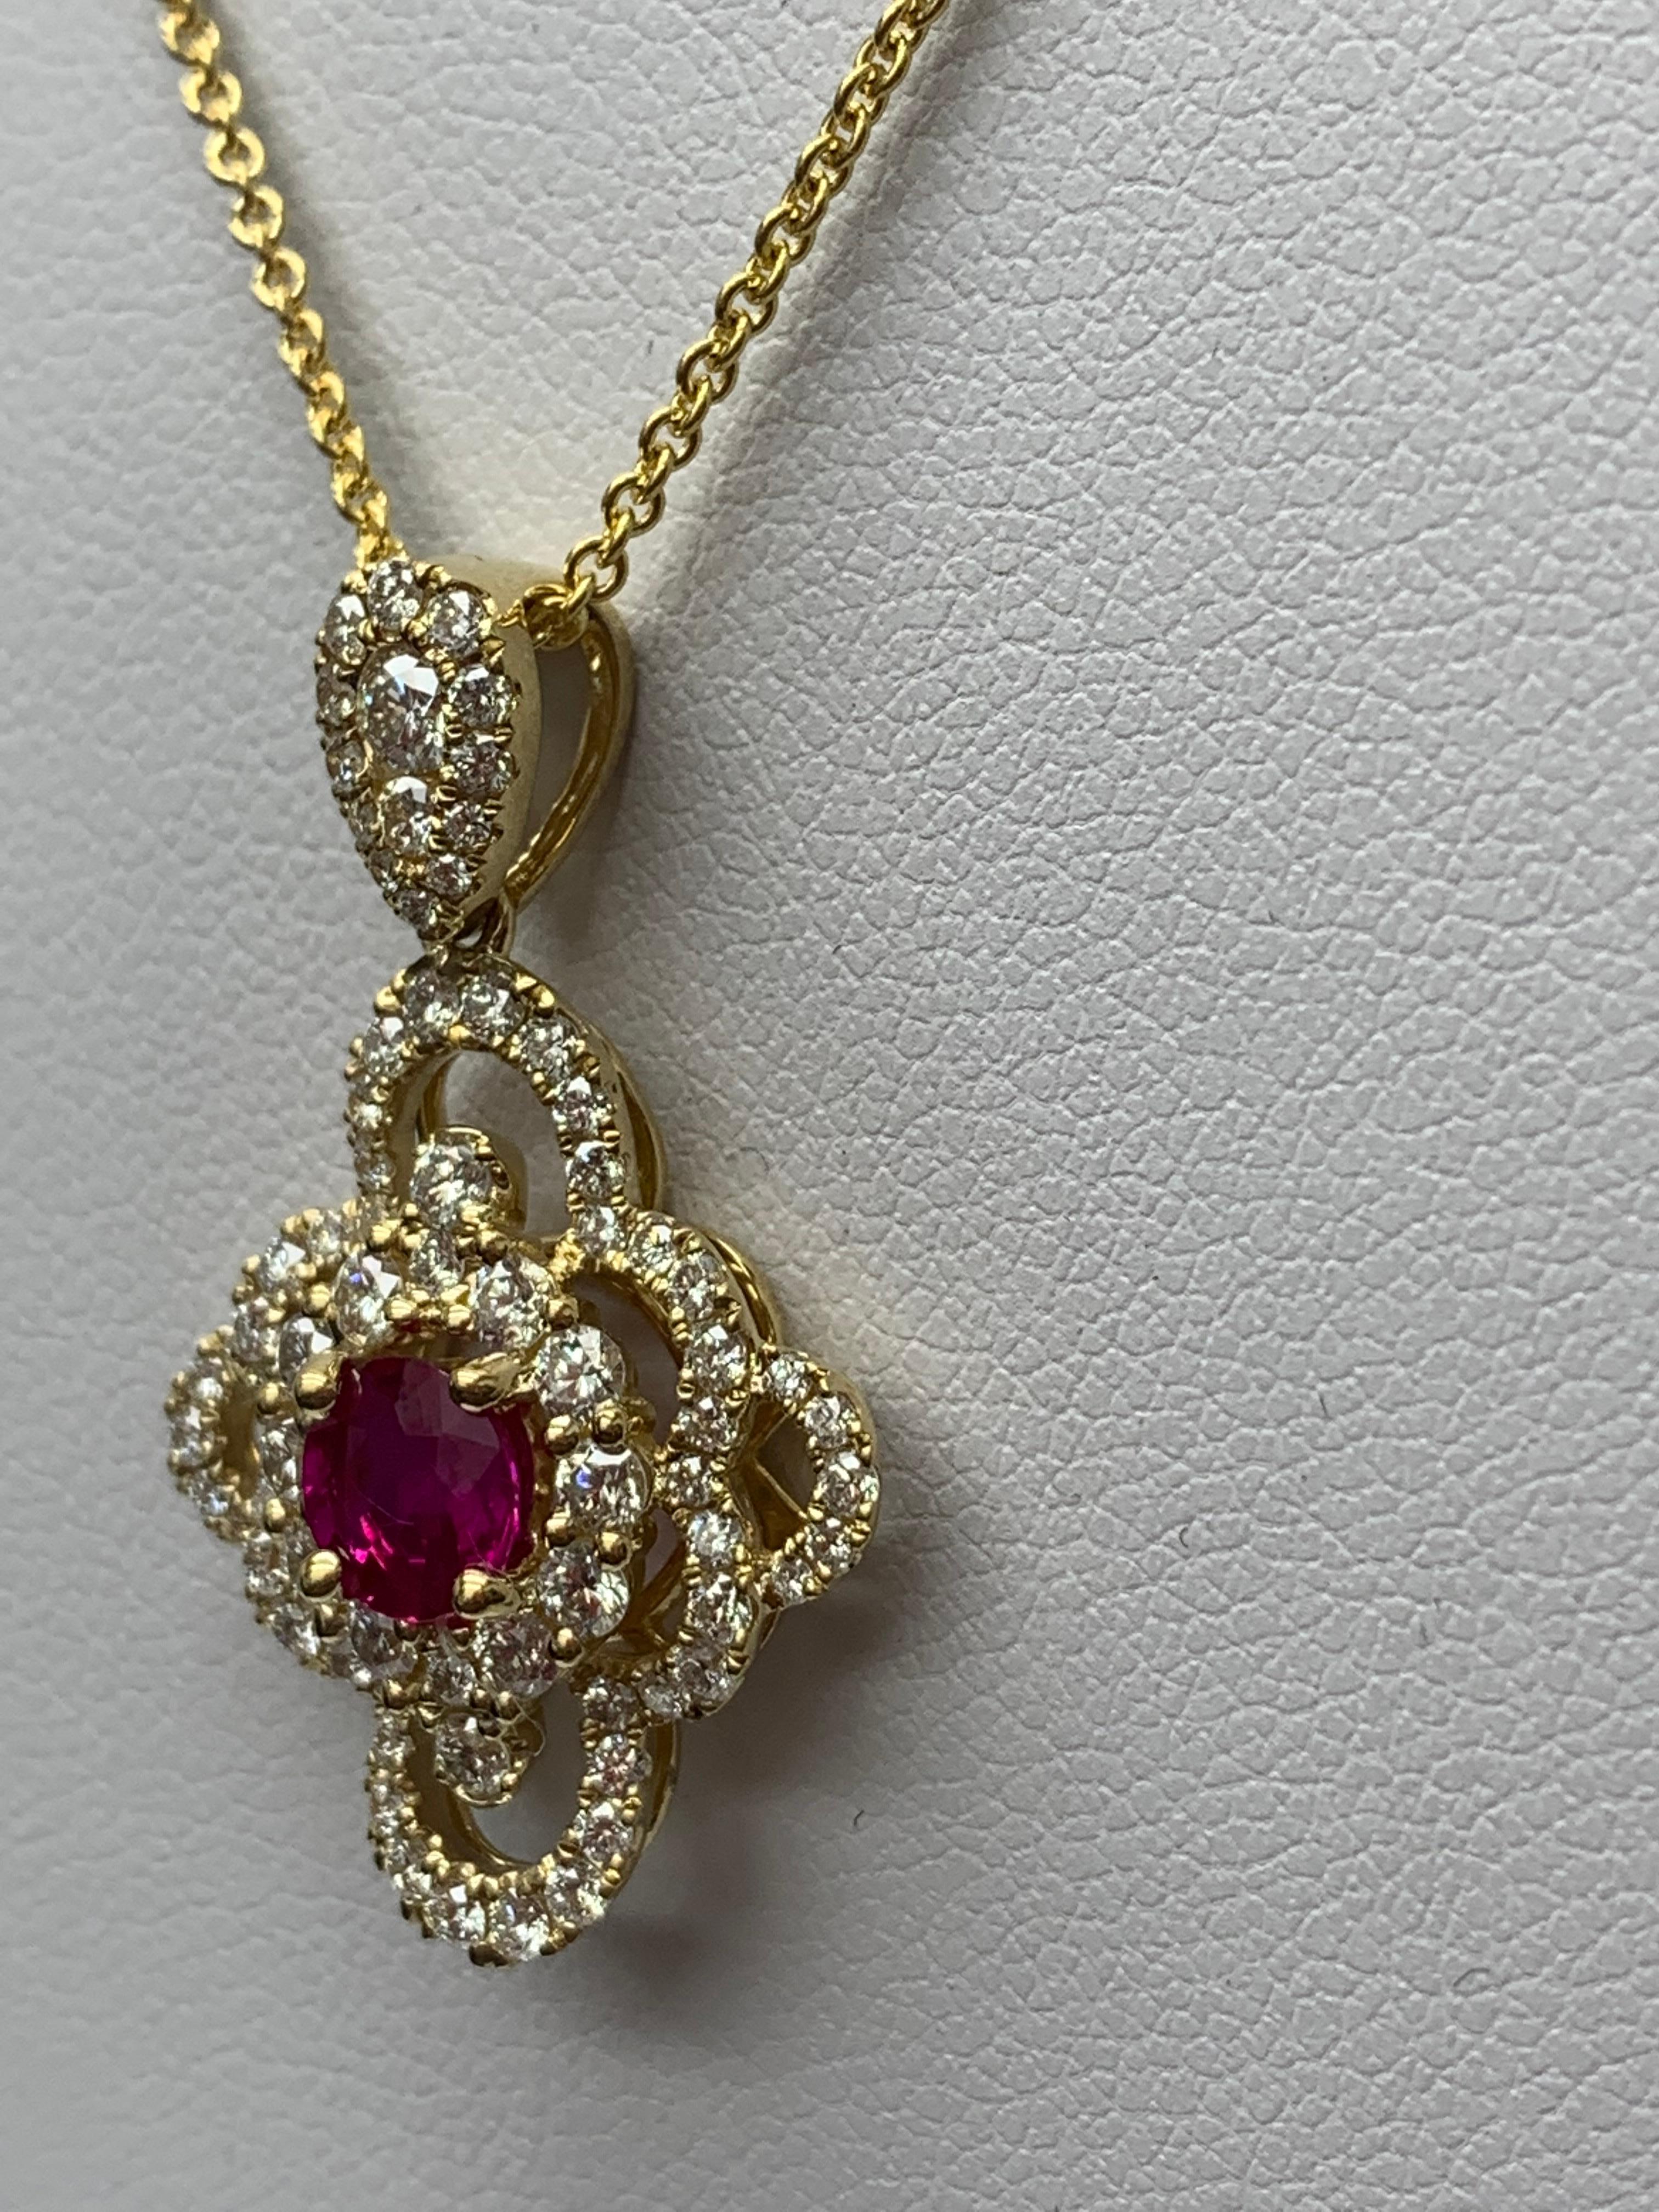 Women's 0.67 Carat Round Cut Ruby and Diamond Pendant Necklace in 18K Yellow Gold For Sale